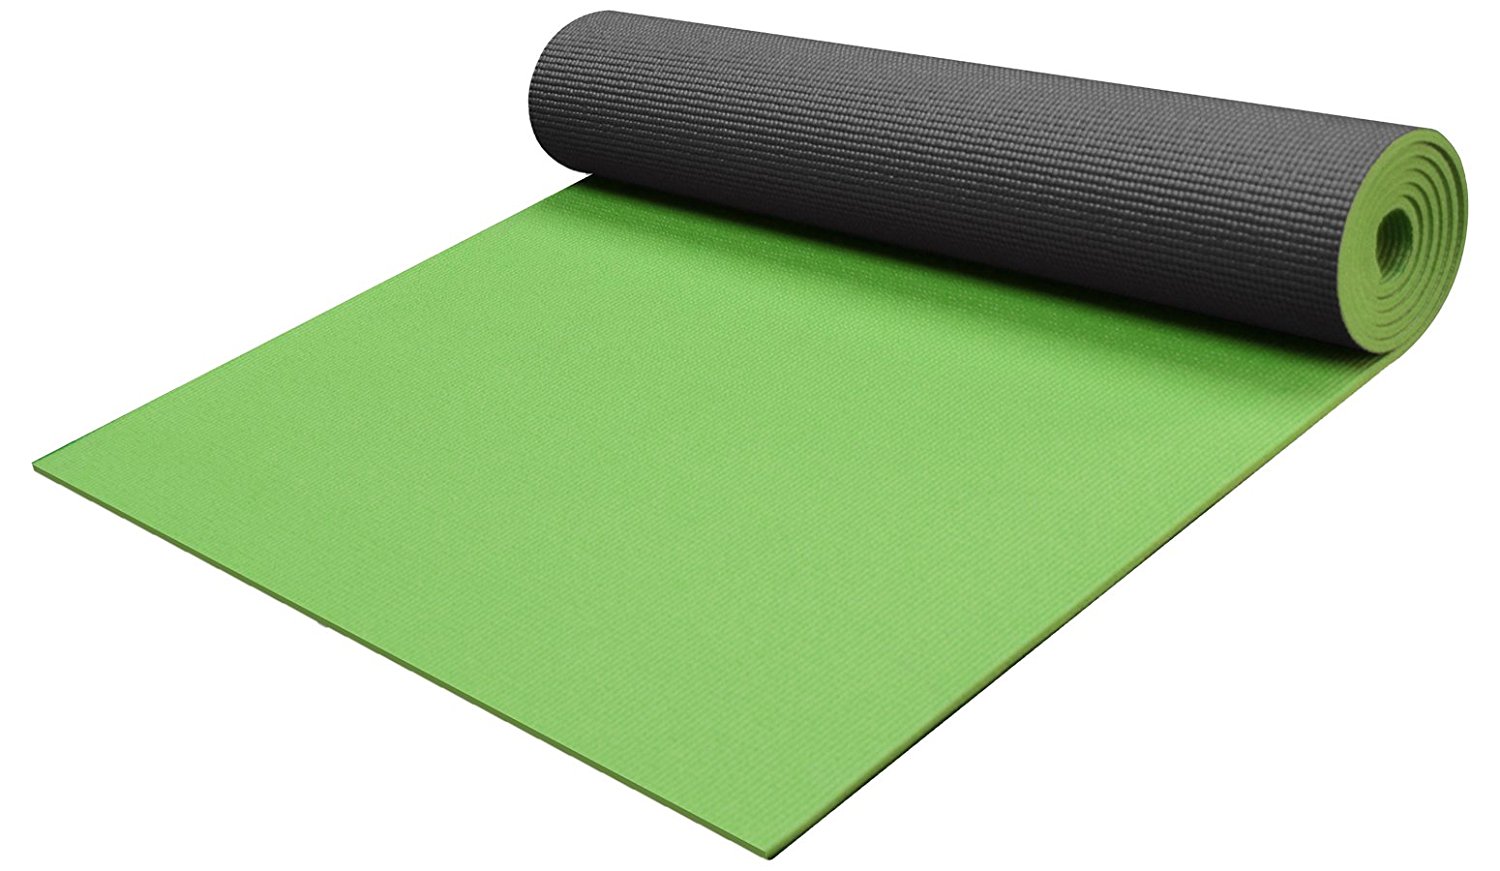  Compass Wind Rose Extra Thick Yoga Mat - Eco Friendly Non-Slip  Exercise & Fitness Mat Workout Mat for All Type of Yoga, Pilates and Floor Exercises  72x24in : Everything Else